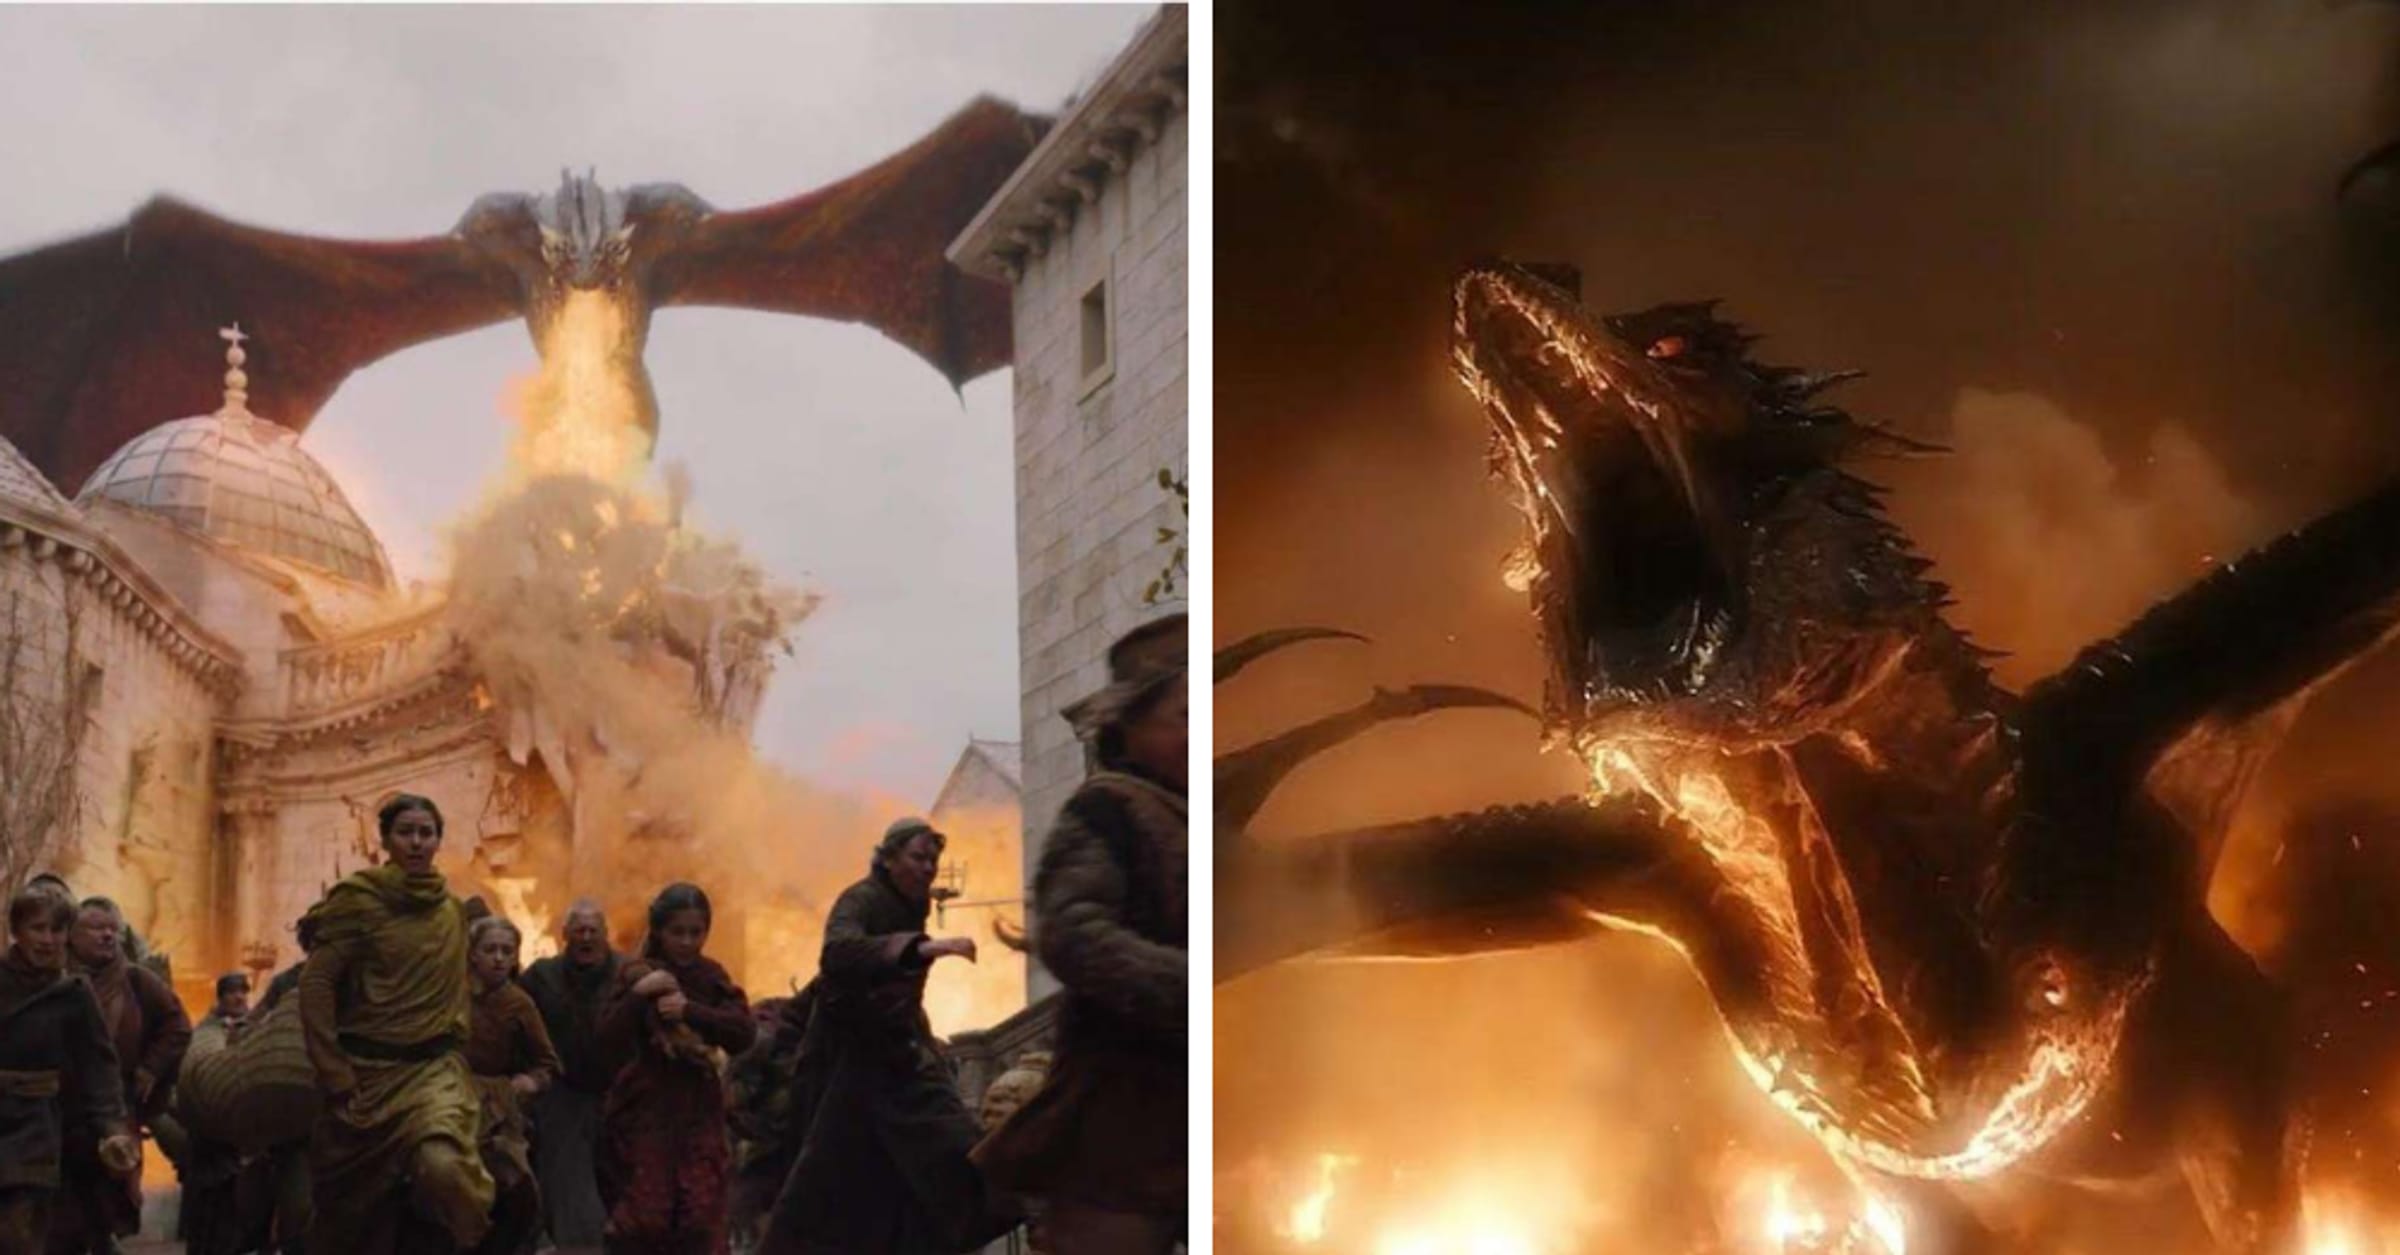 House of the Dragon: The 18 strongest dragons in Games of Thrones